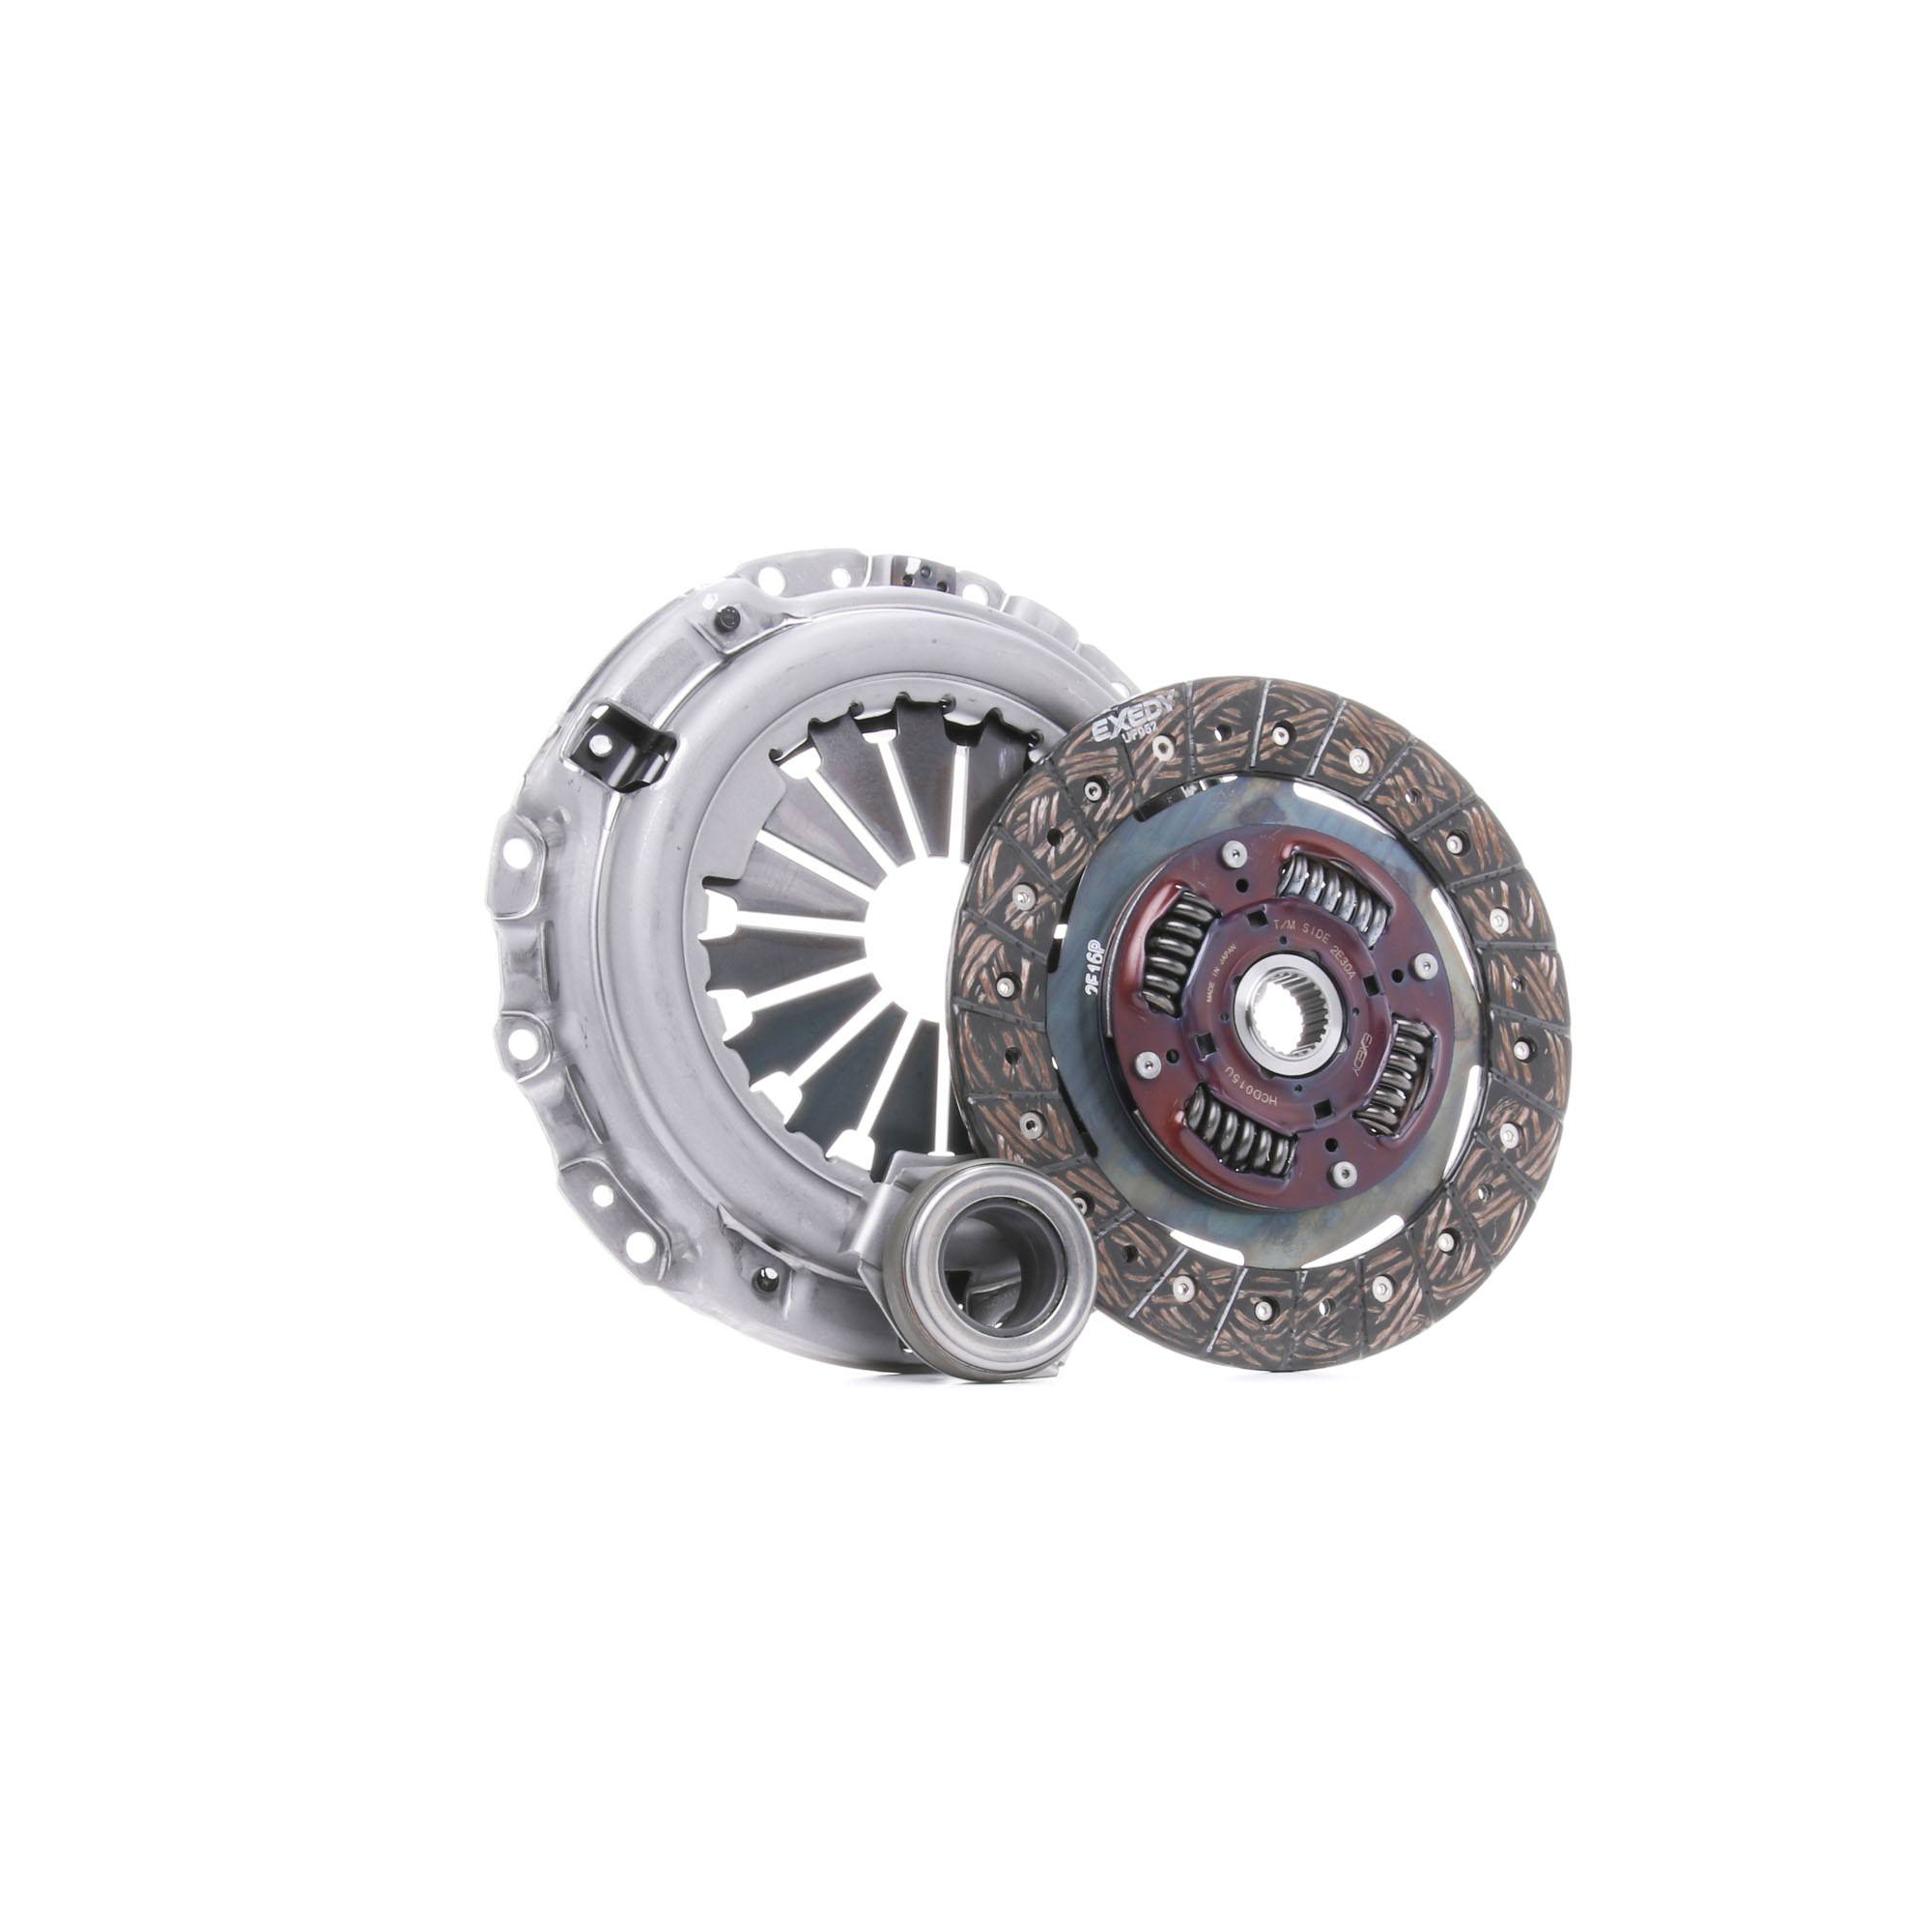 EXEDY HCK2021 Clutch kit LAND ROVER experience and price